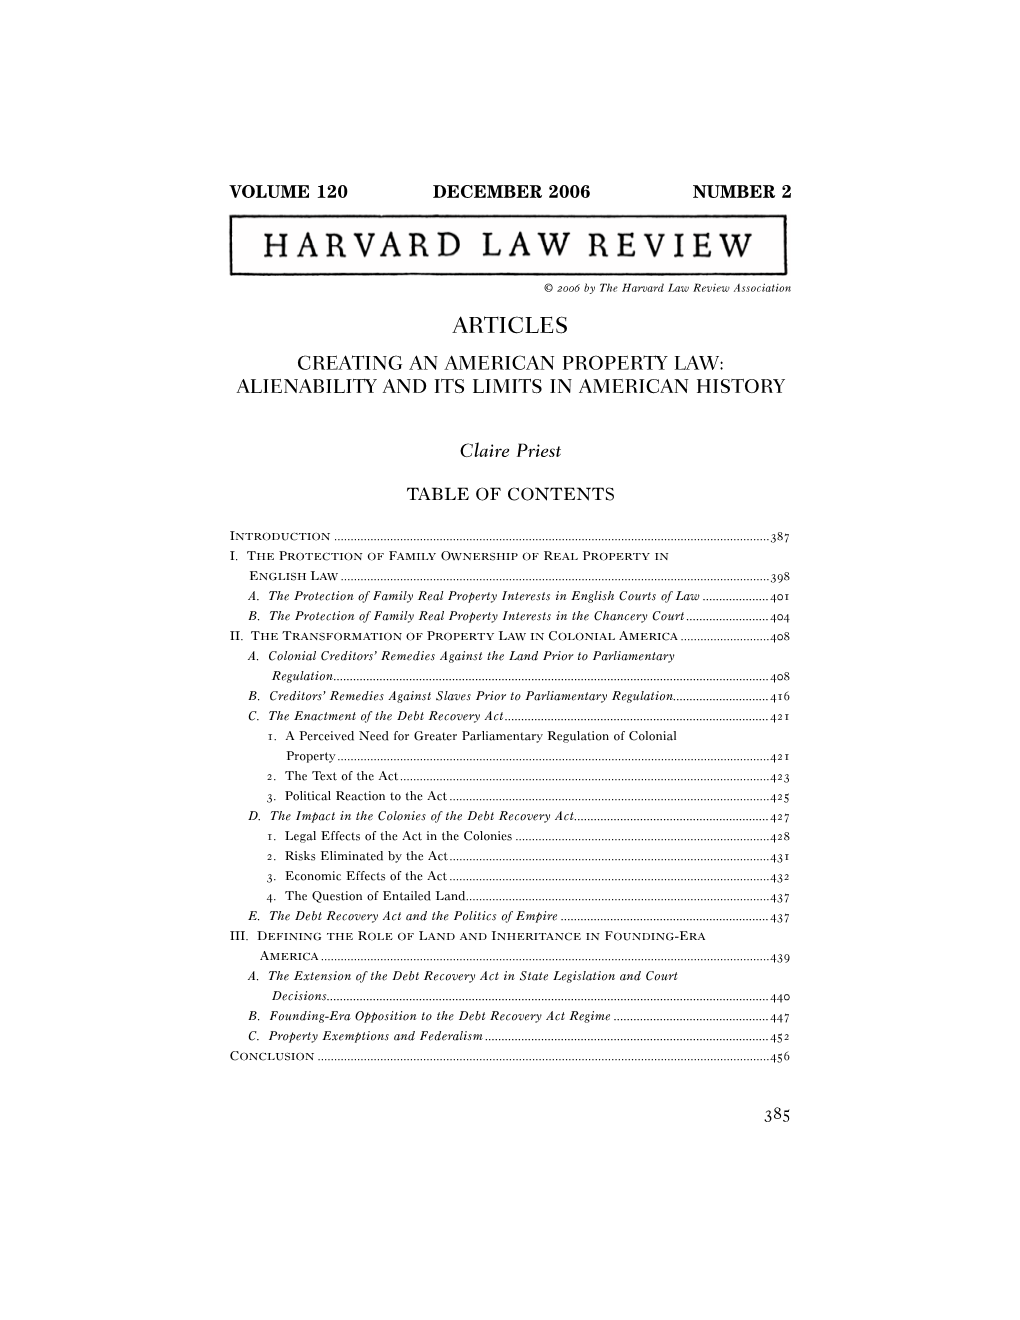 Articles Creating an American Property Law: Alienability and Its Limits in American History